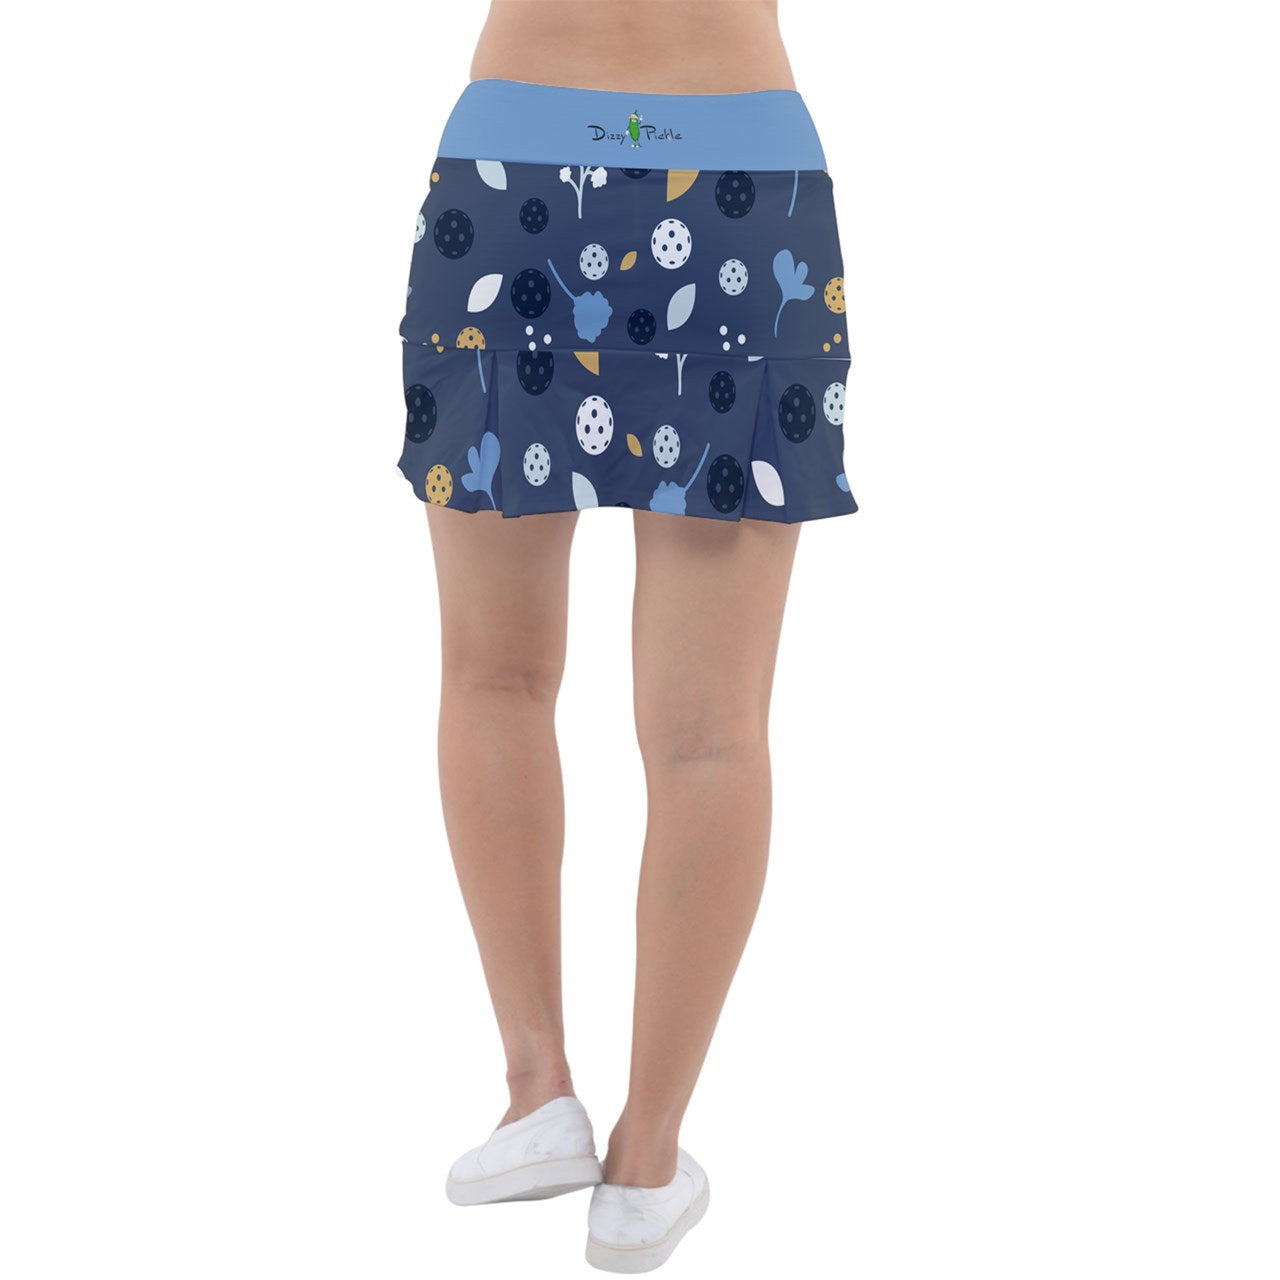 Dizzy Pickle Lesley Women's Pickleball Classic Pleated Skort Coordinating Patterned Inner Shorts Pockets Gray